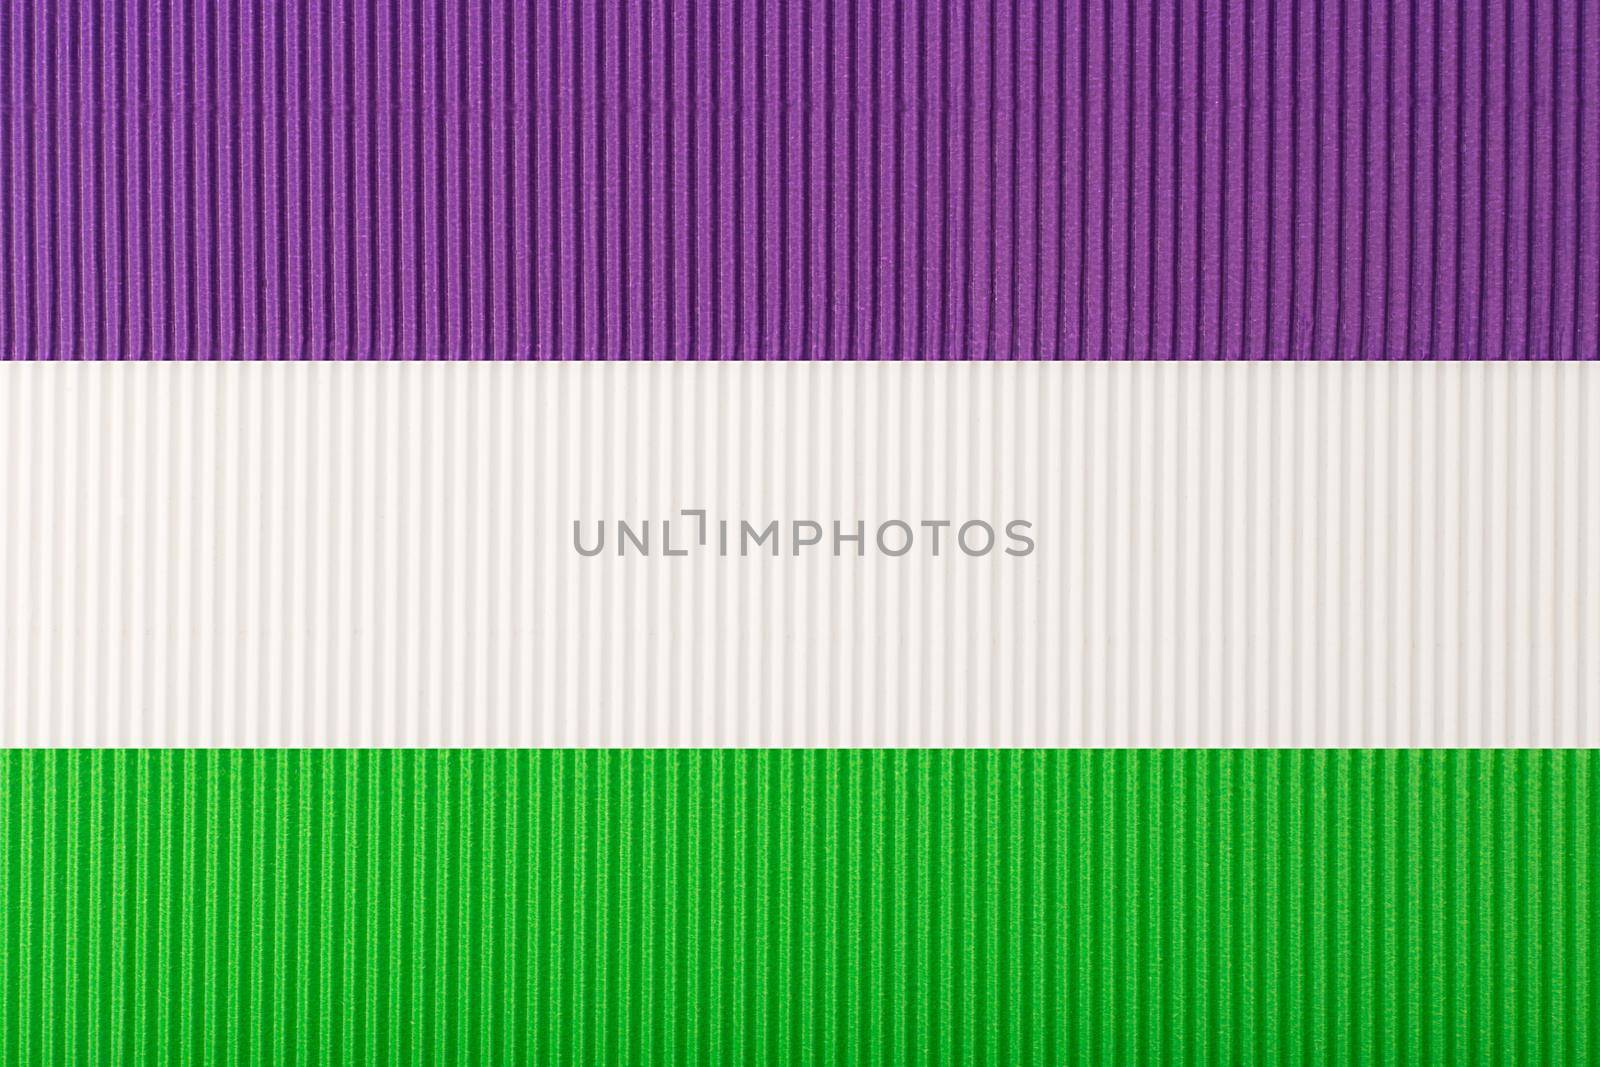 Official Genderqueer flag made of purple, white and green corrugated paper. Concept of genderqueer pride, agenderness, tolerance and respect for sexual minorities